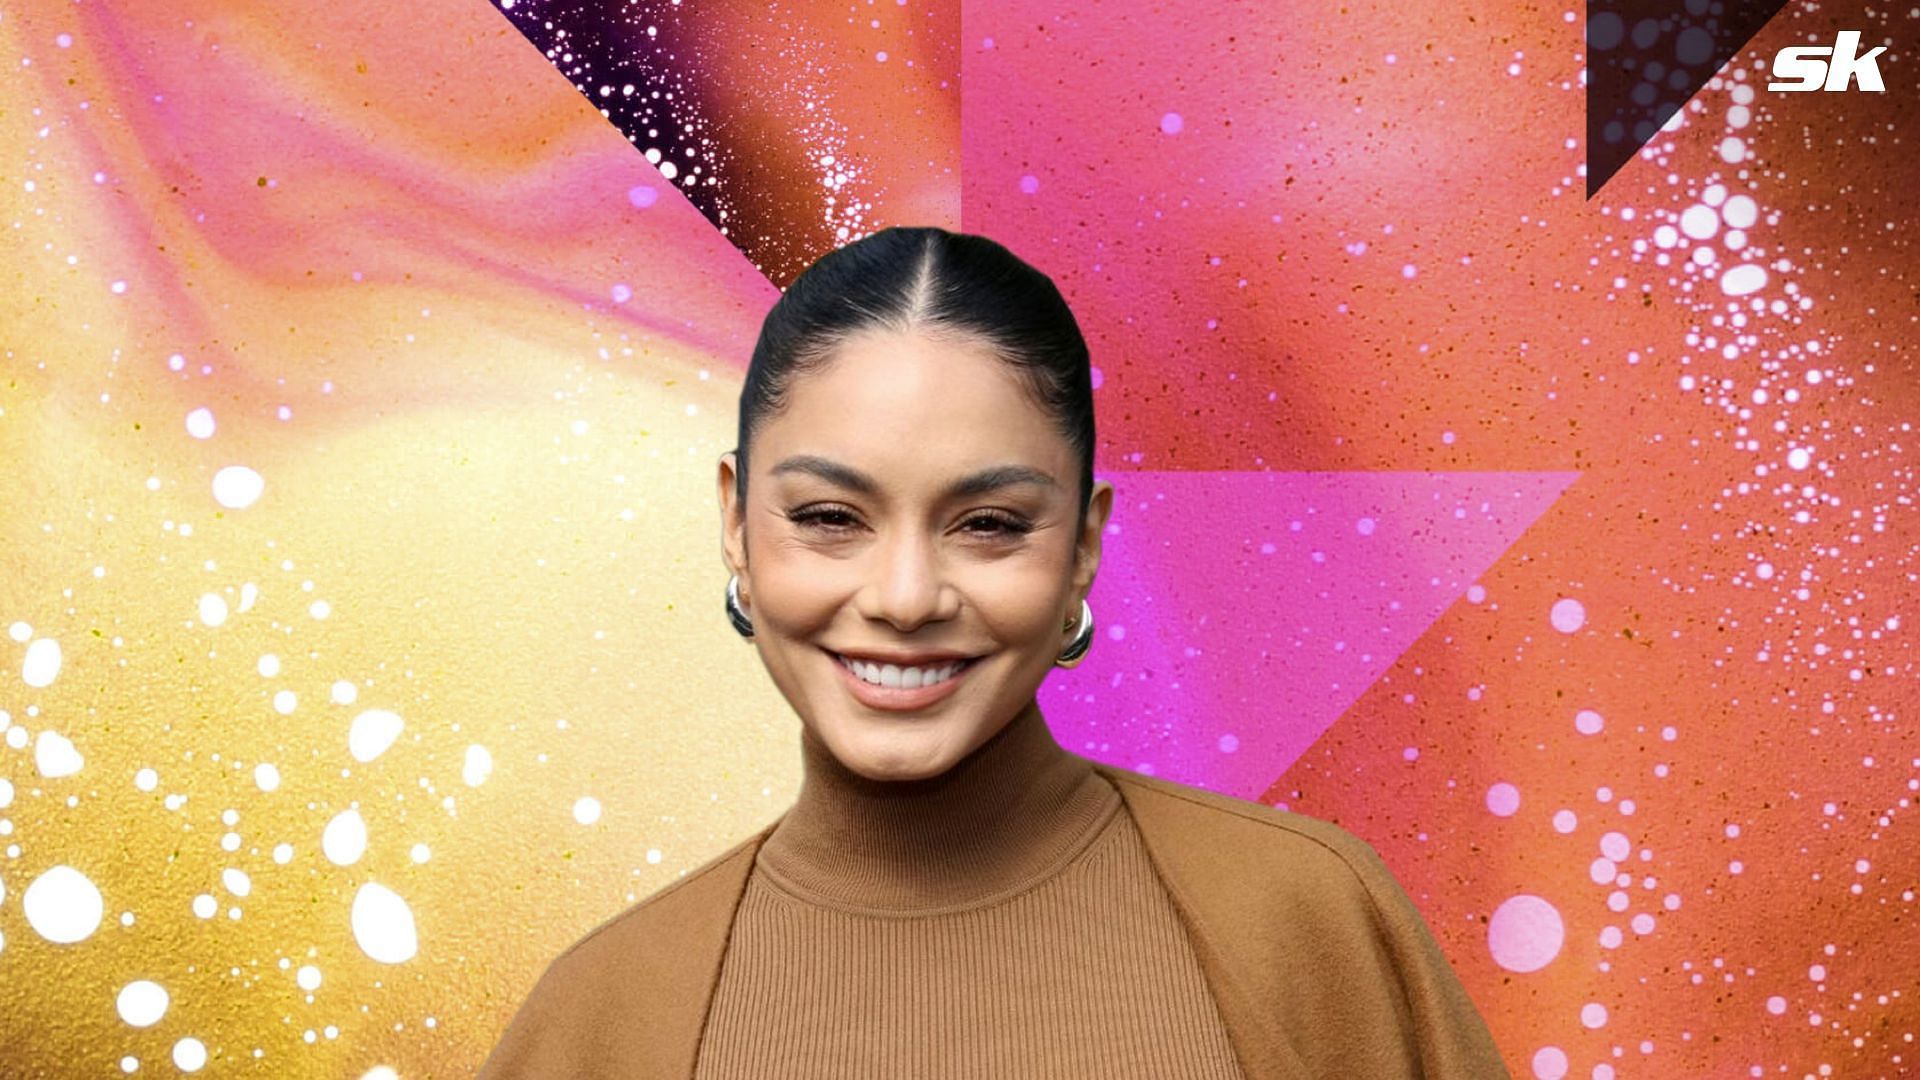 Vanessa Hudgens owns a brand called Cali Water 